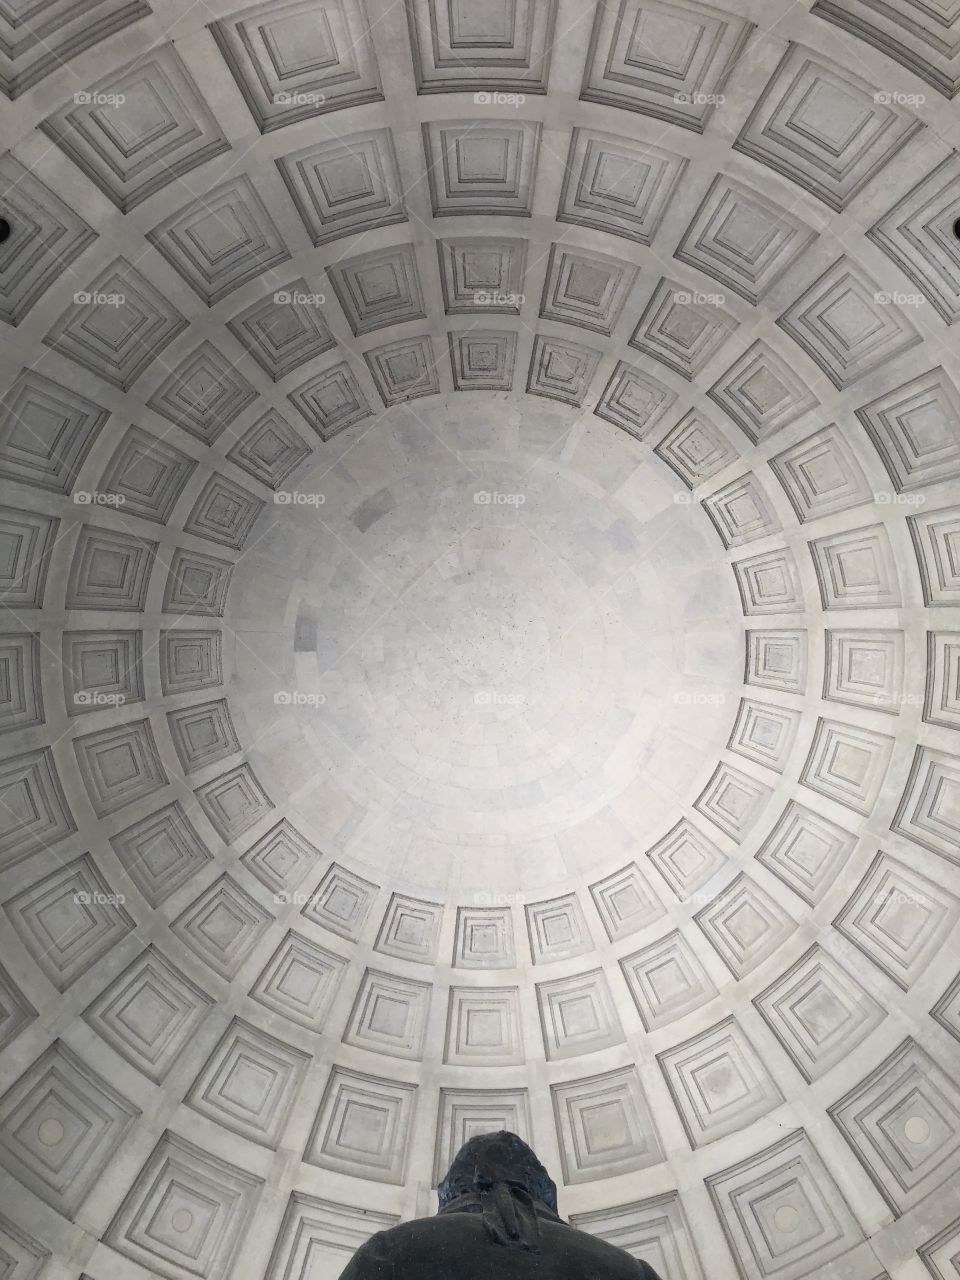 Natural light illuminates the decorative marble ceiling of the dome of a monument